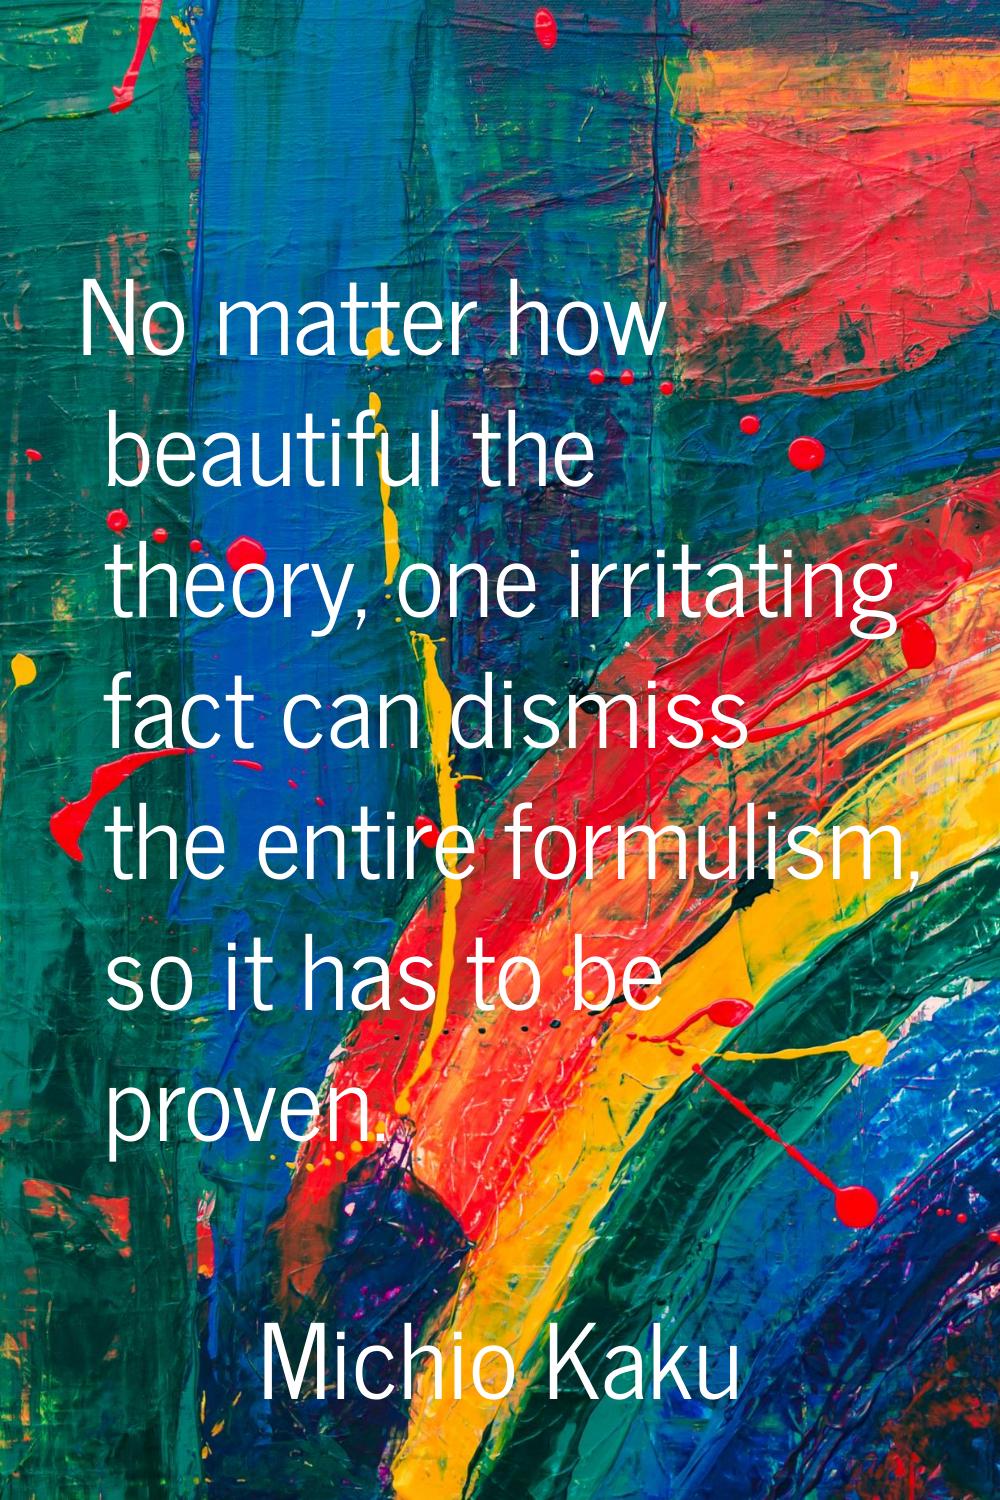 No matter how beautiful the theory, one irritating fact can dismiss the entire formulism, so it has